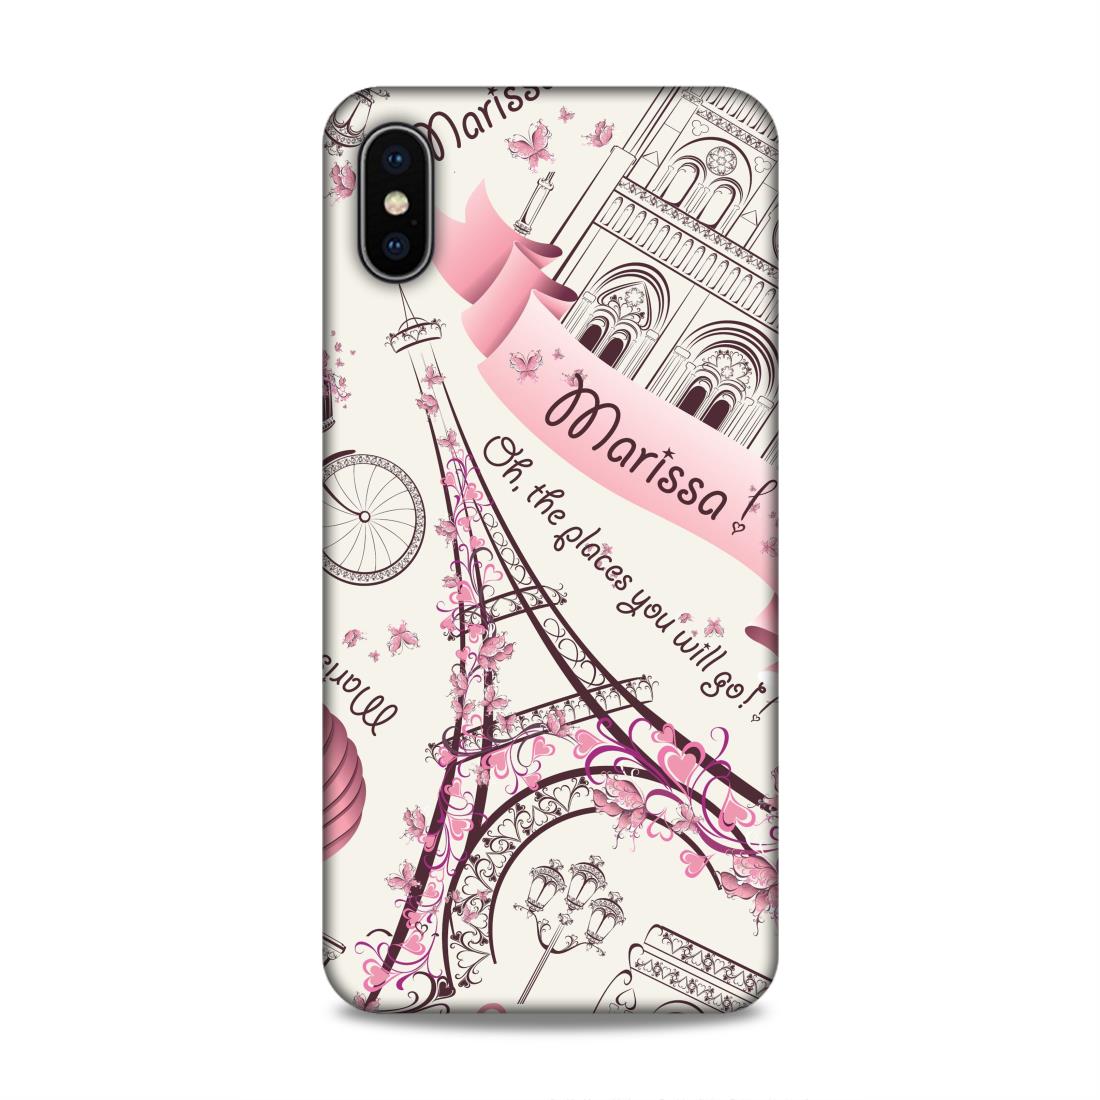 Love Efile Tower Hard Back Case For Apple iPhone XS Max